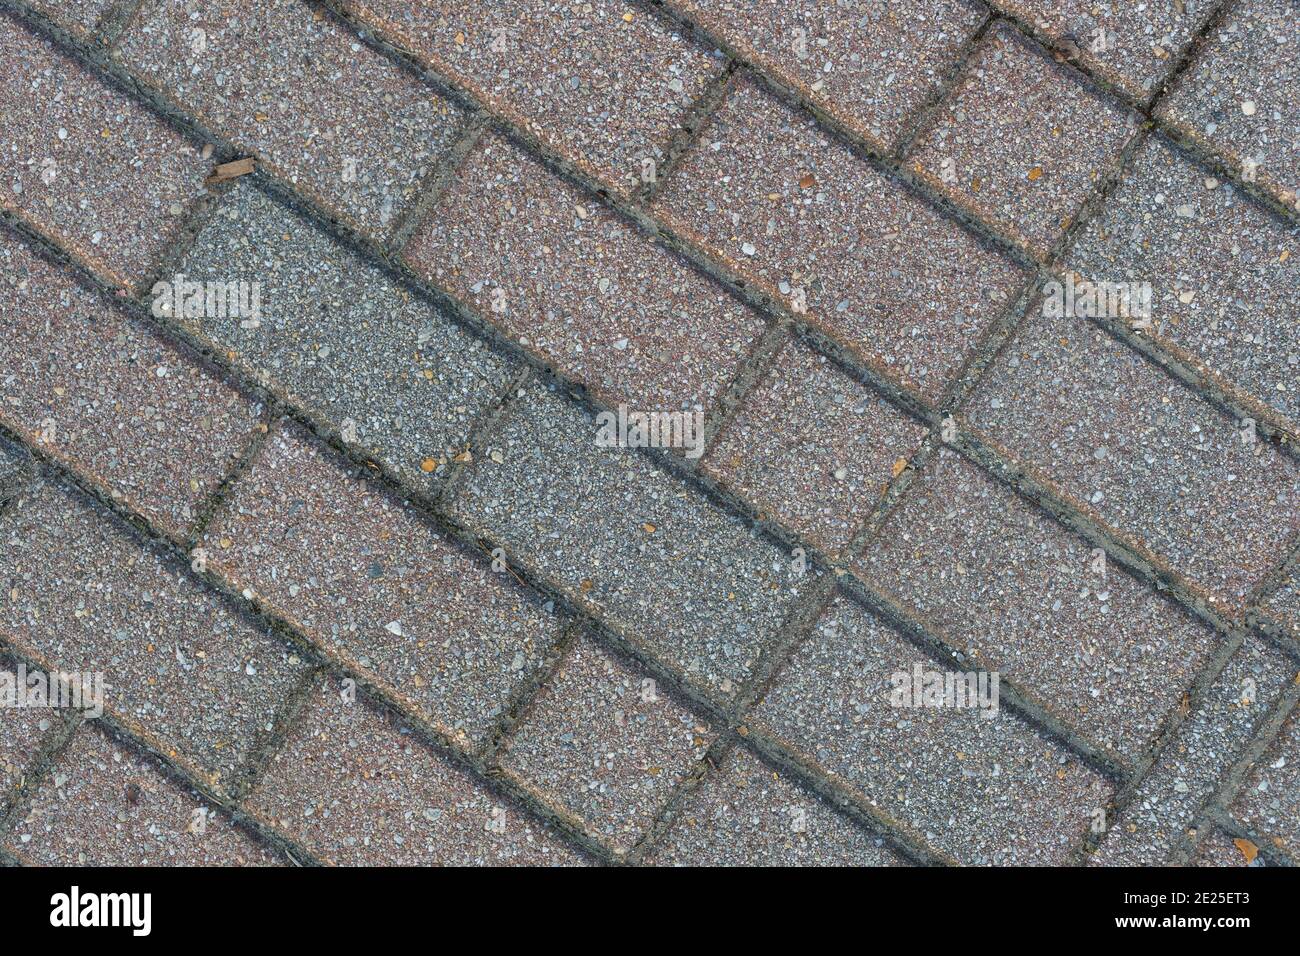 Top angle view of several rows of paving bricks in the early morning light. Stock Photo